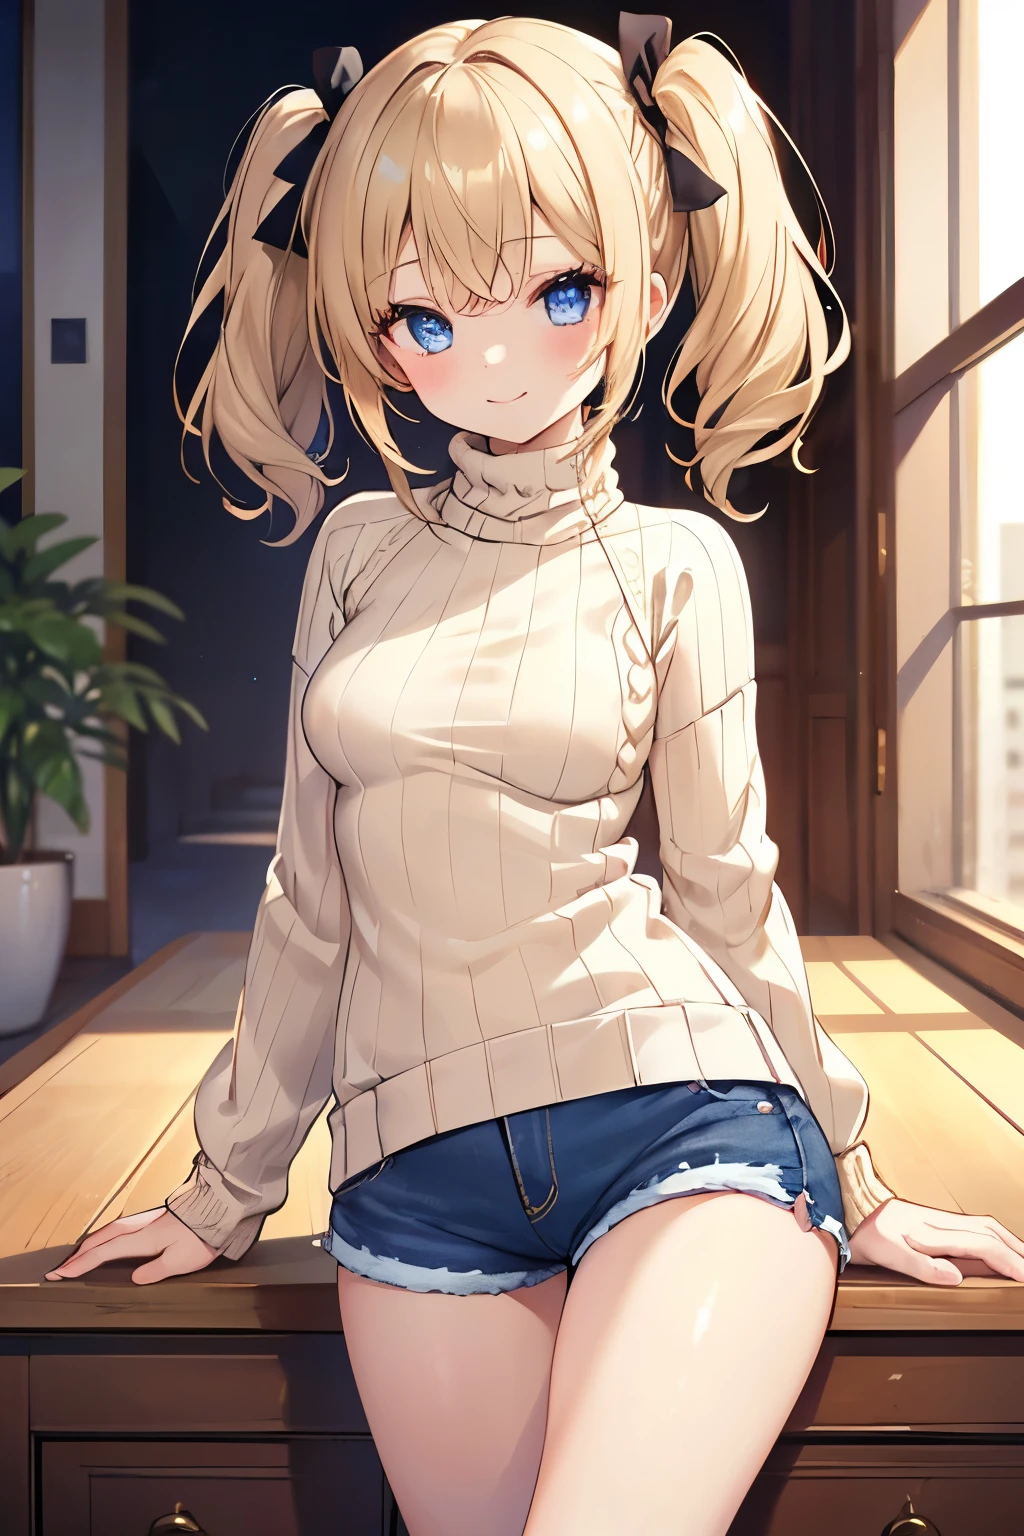 Blonde、Blue Eyes、girl、Small breasts、Twin tails、girl、Small breasts、Lolita、Bright smile、Looks about 15 years old、Petan Musume、short、目のhighlight、Sexy thighs、(Long knit sweater with beige high neck:1.4), ,(Blue jeans fabric shorts),Your eyes are so beautiful、highlight